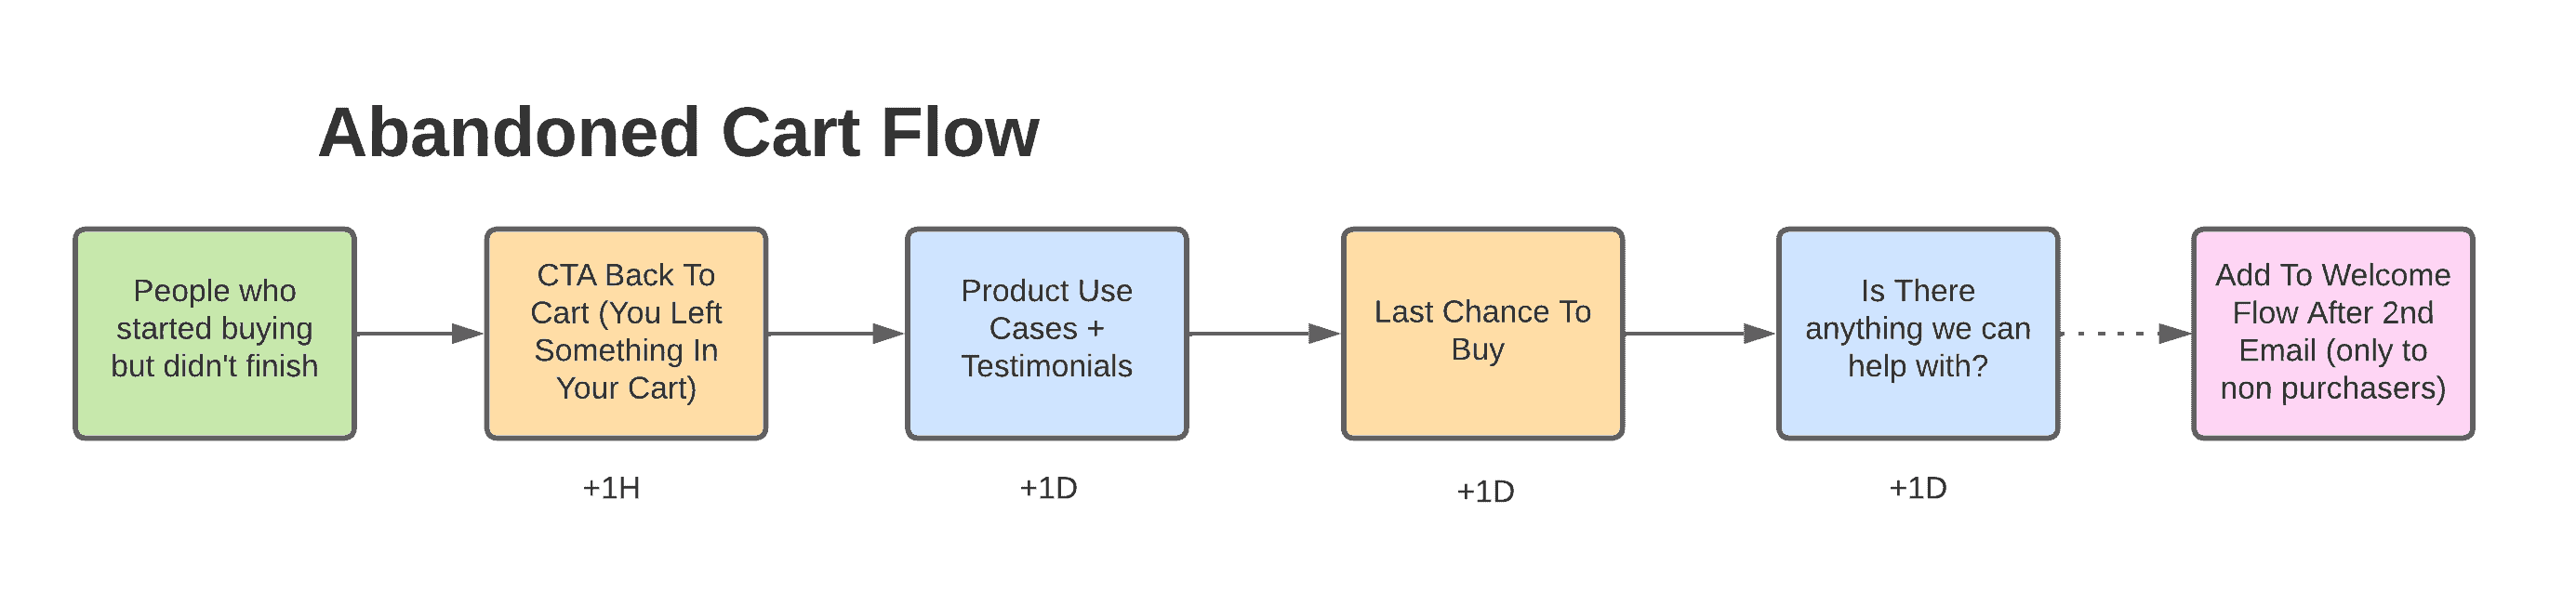 abandoned cart flow example